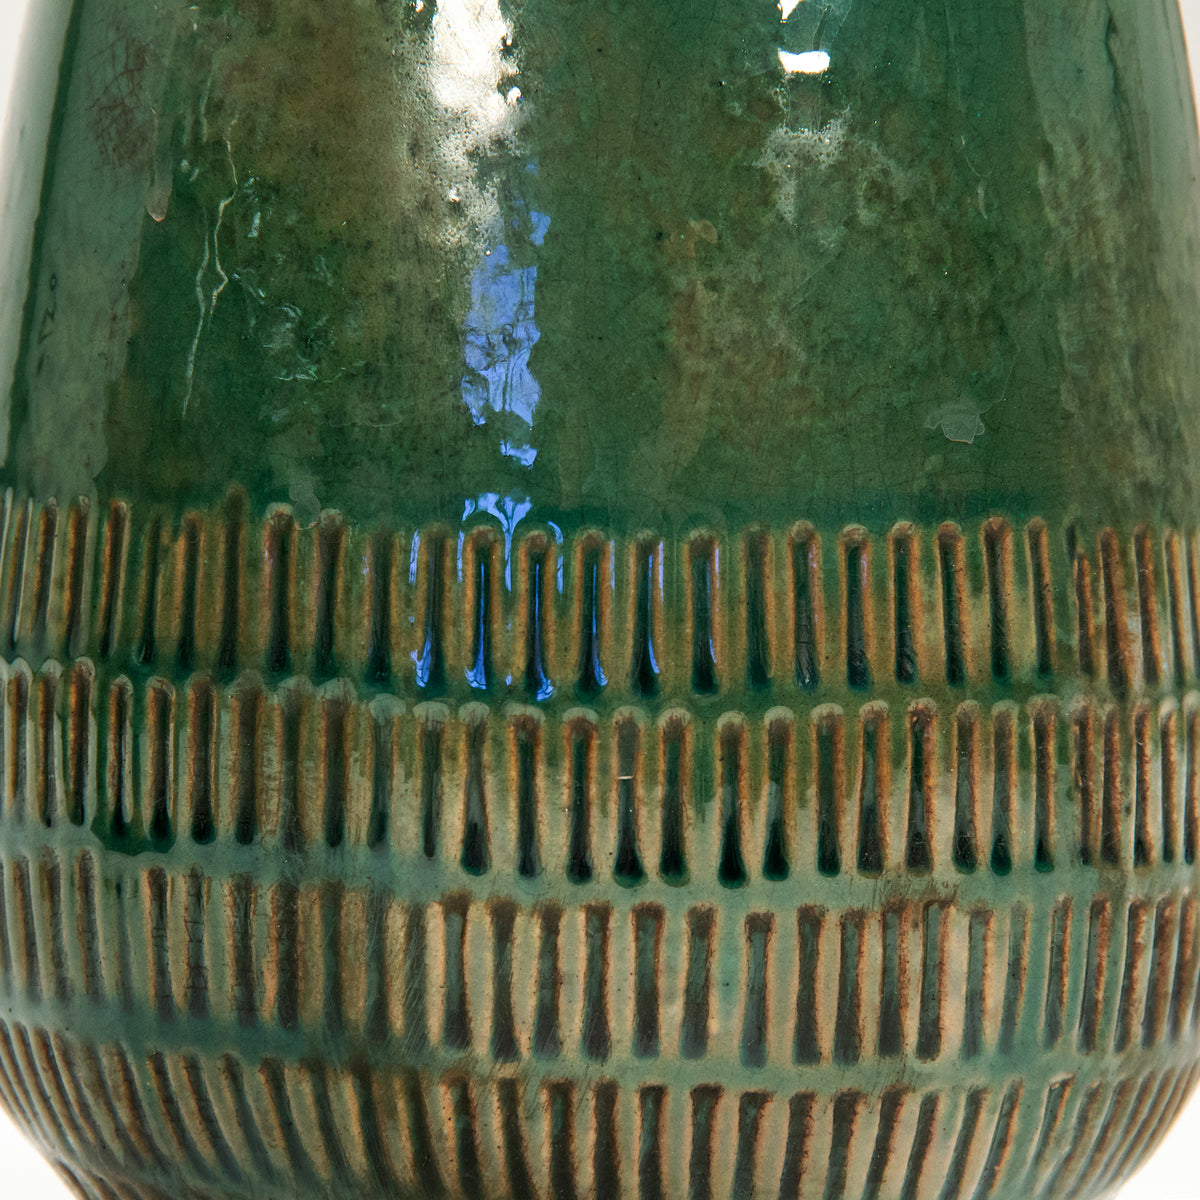 Distressed Emerald Vase Large by Zentique